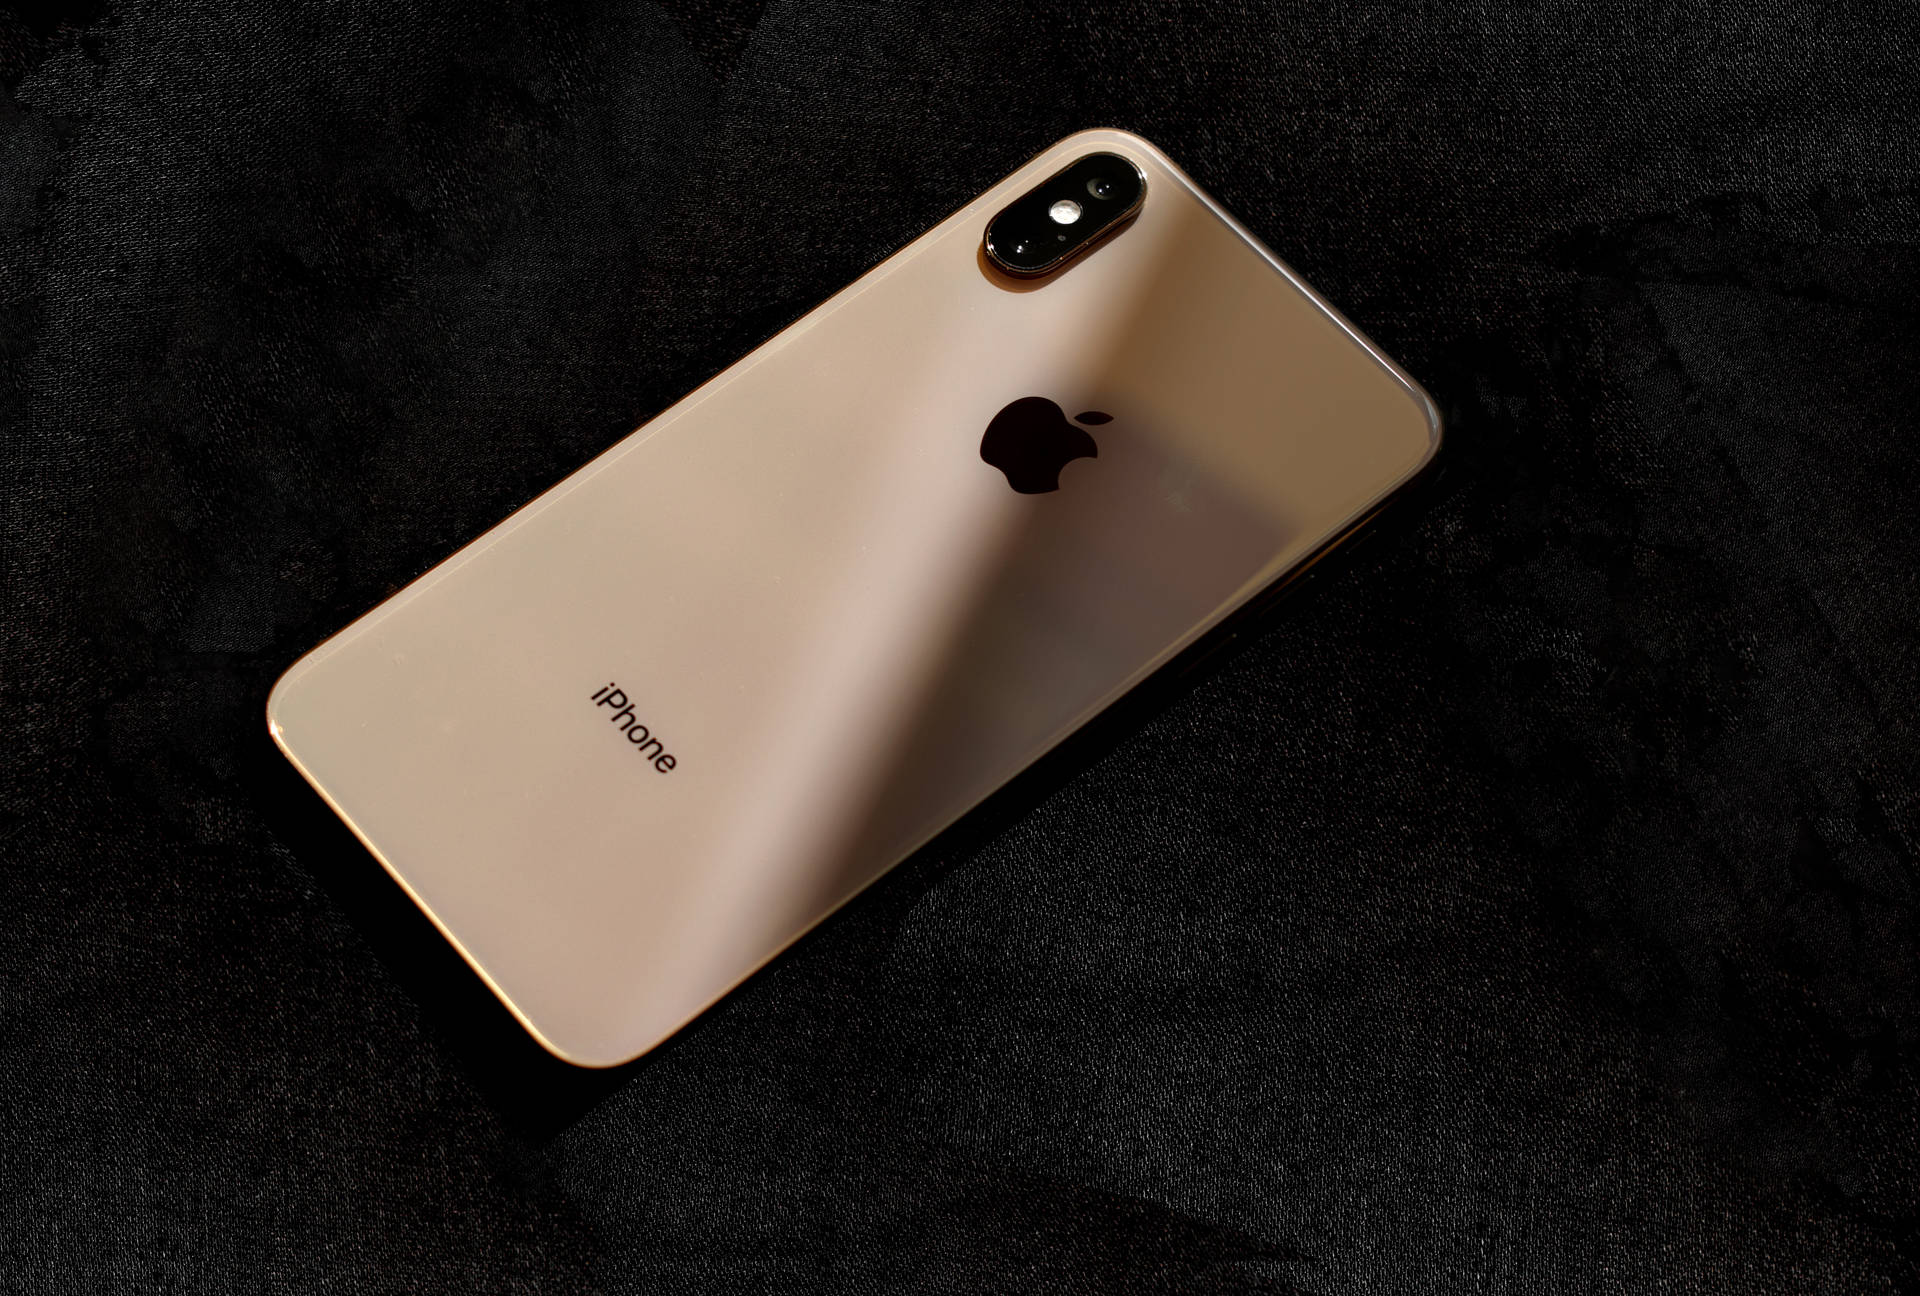 Free Black And Gold Iphone Wallpaper Downloads, [100+] Black And Gold Iphone  Wallpapers for FREE 